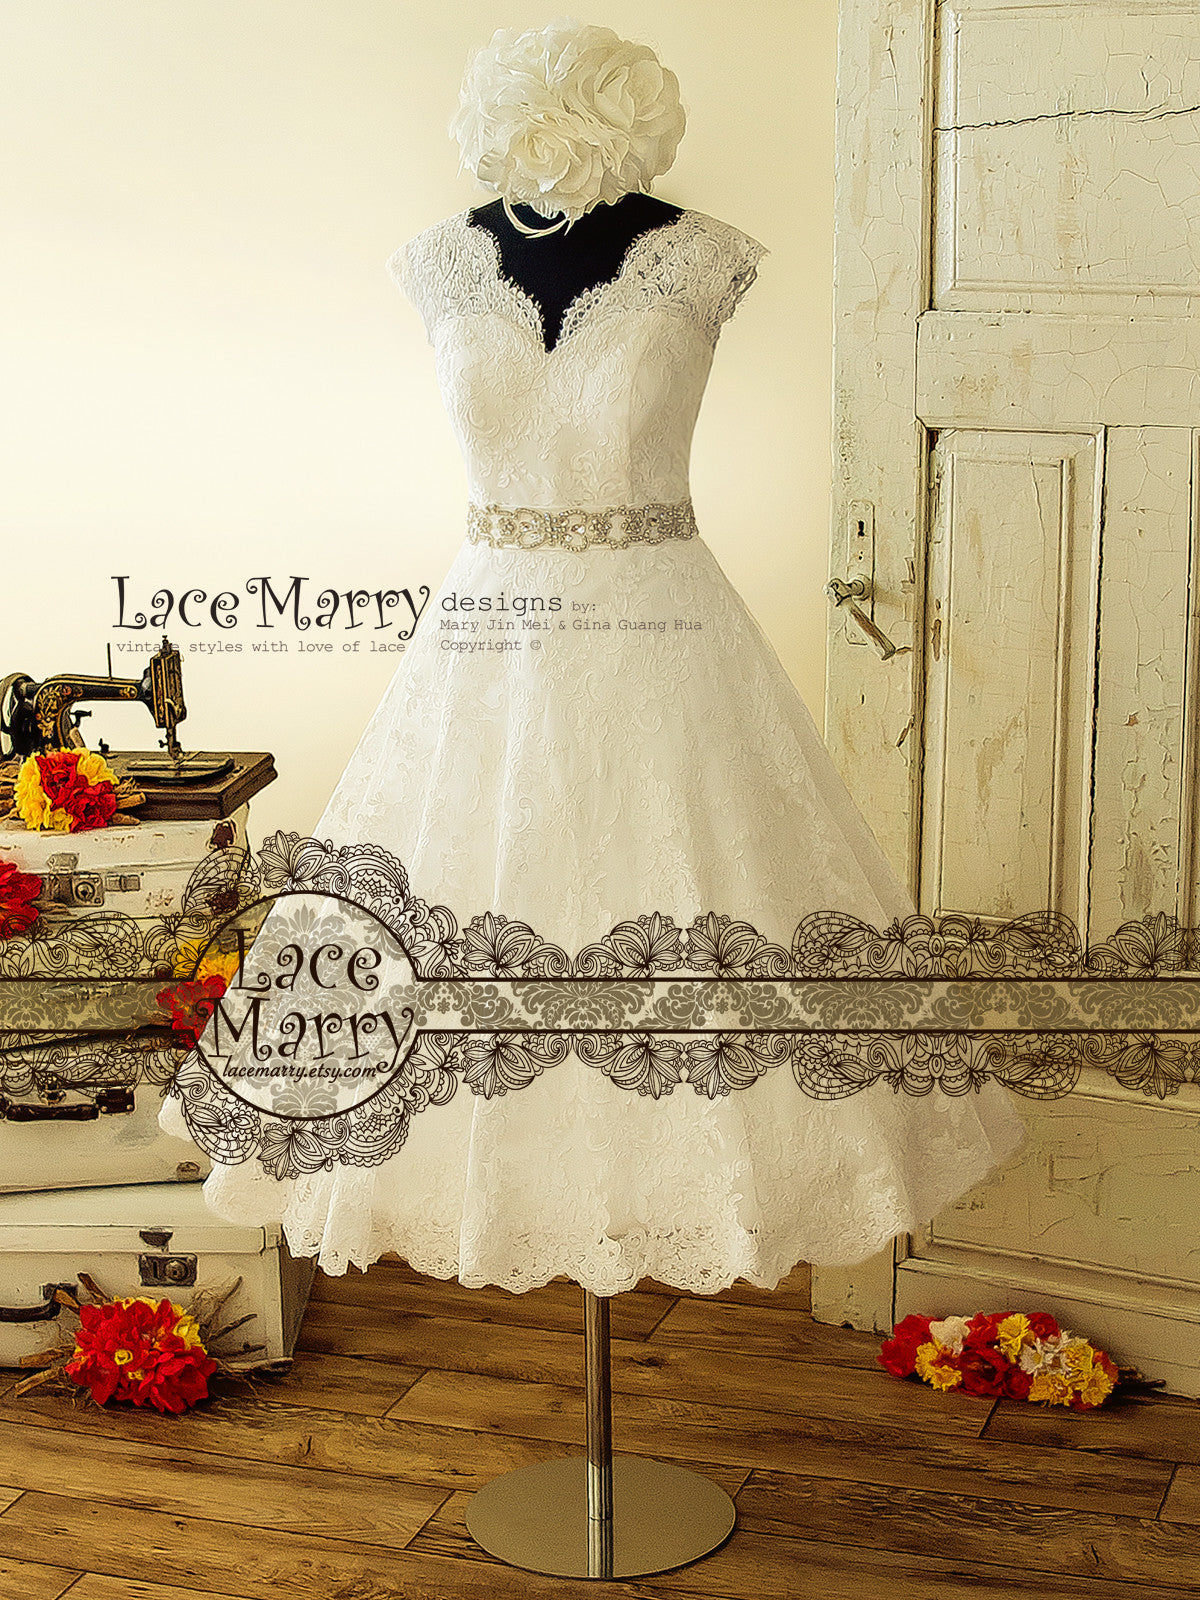 Scalloped Lace Wedding Dresses & Gowns